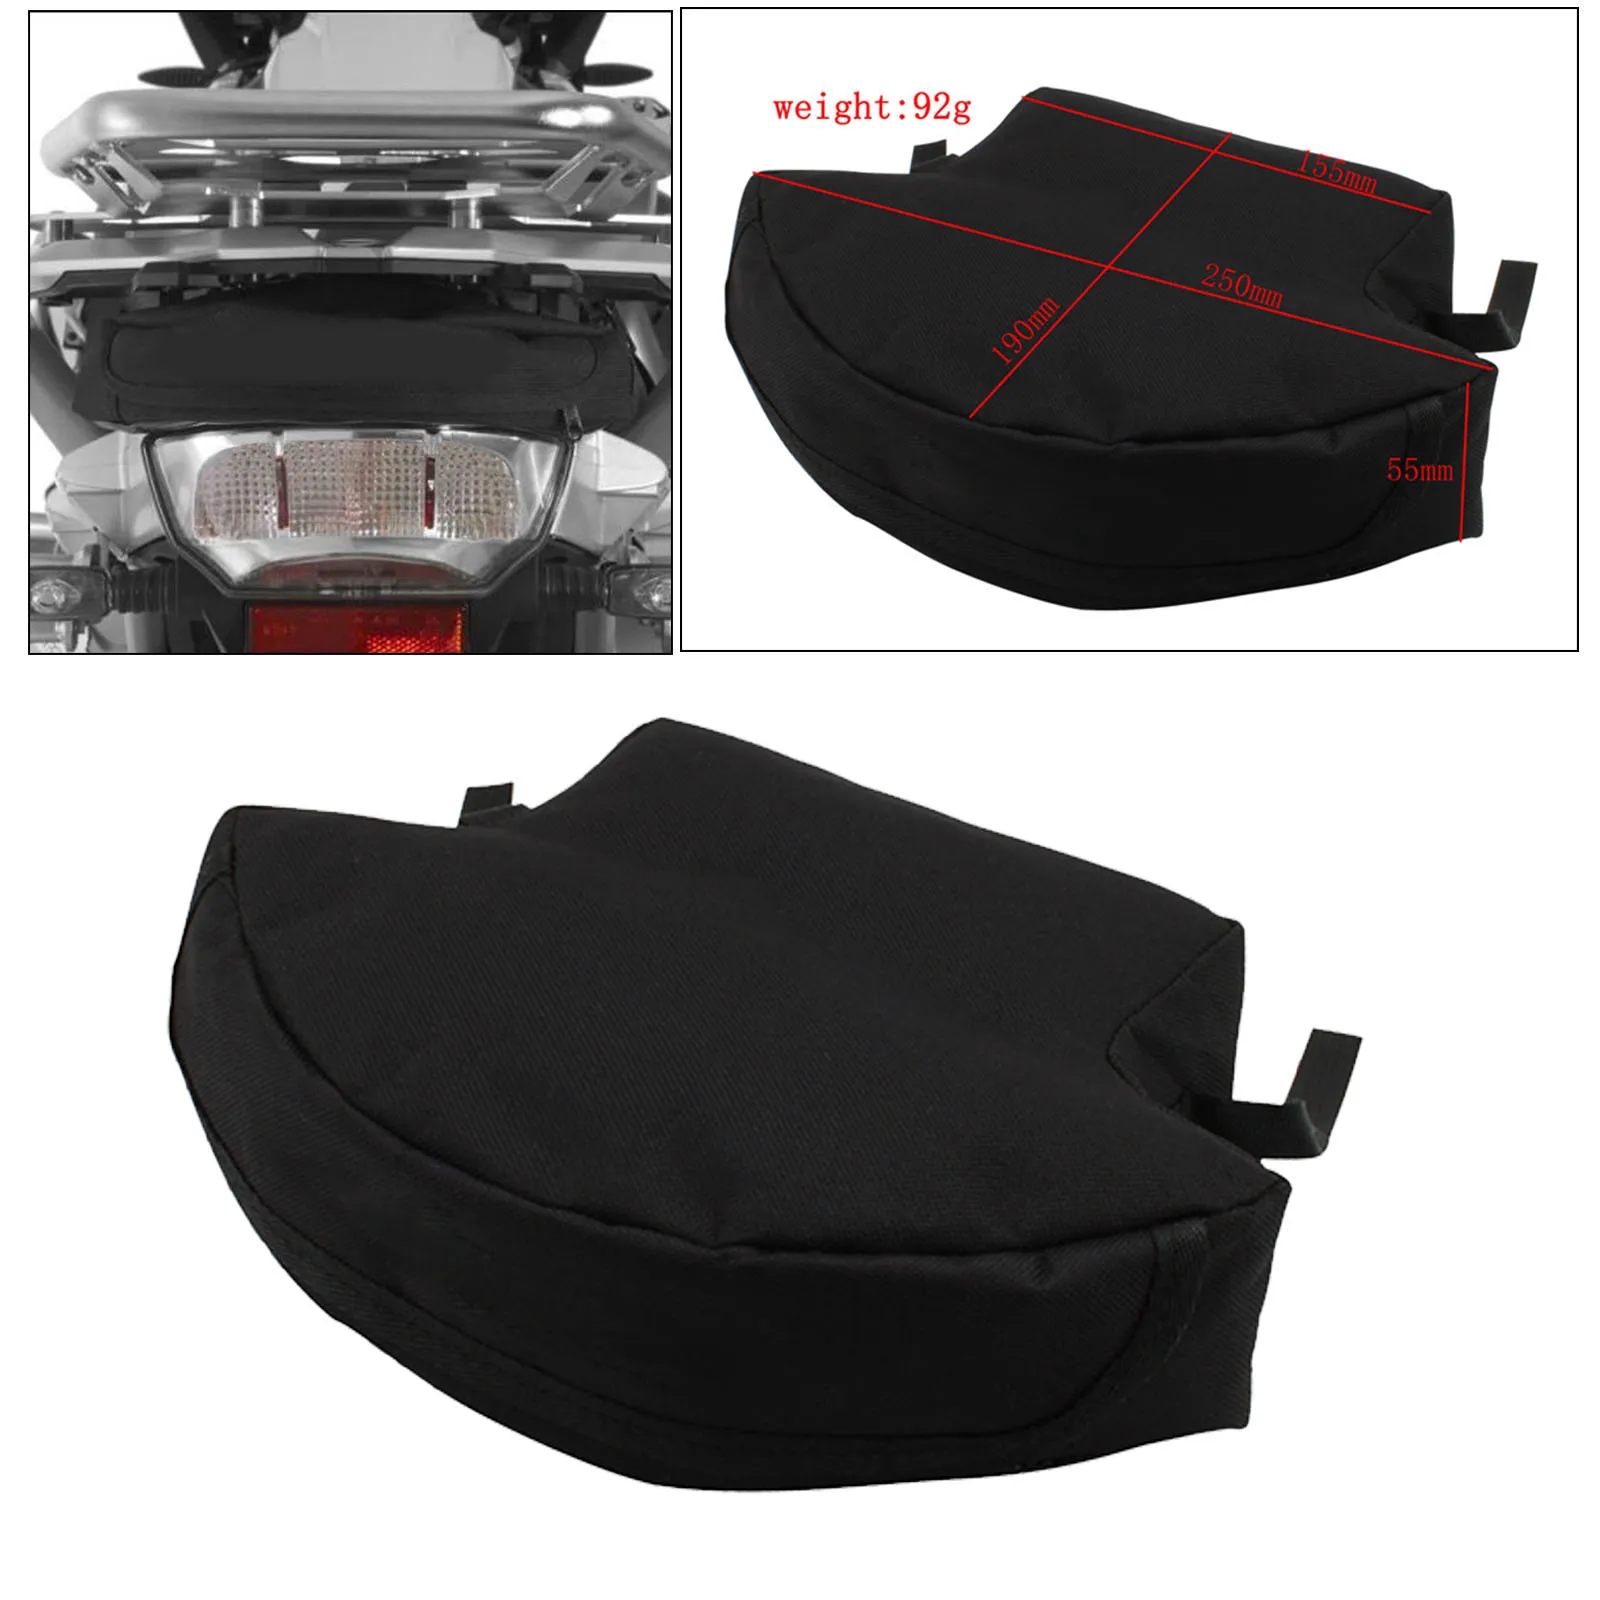 Motorcycle Gap Tool Storage Bag Seat Tail Bag for BMW R1250GS R1200GS F850GS F750GS 2013-